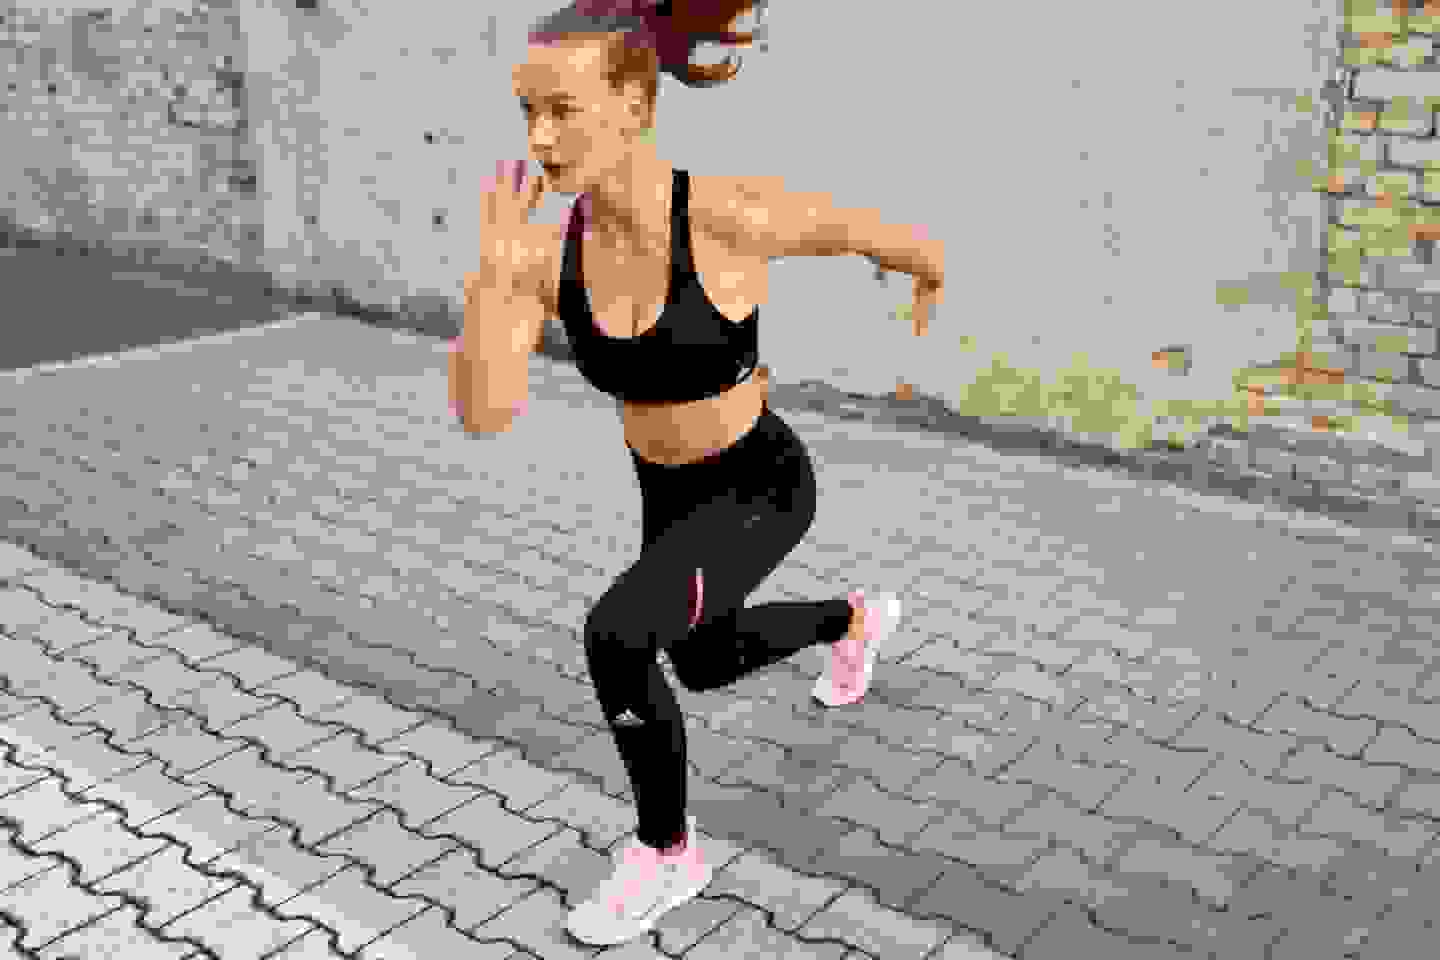 A woman wearing an adidas bra and tights holds a yoga pose in front of a concrete wall.